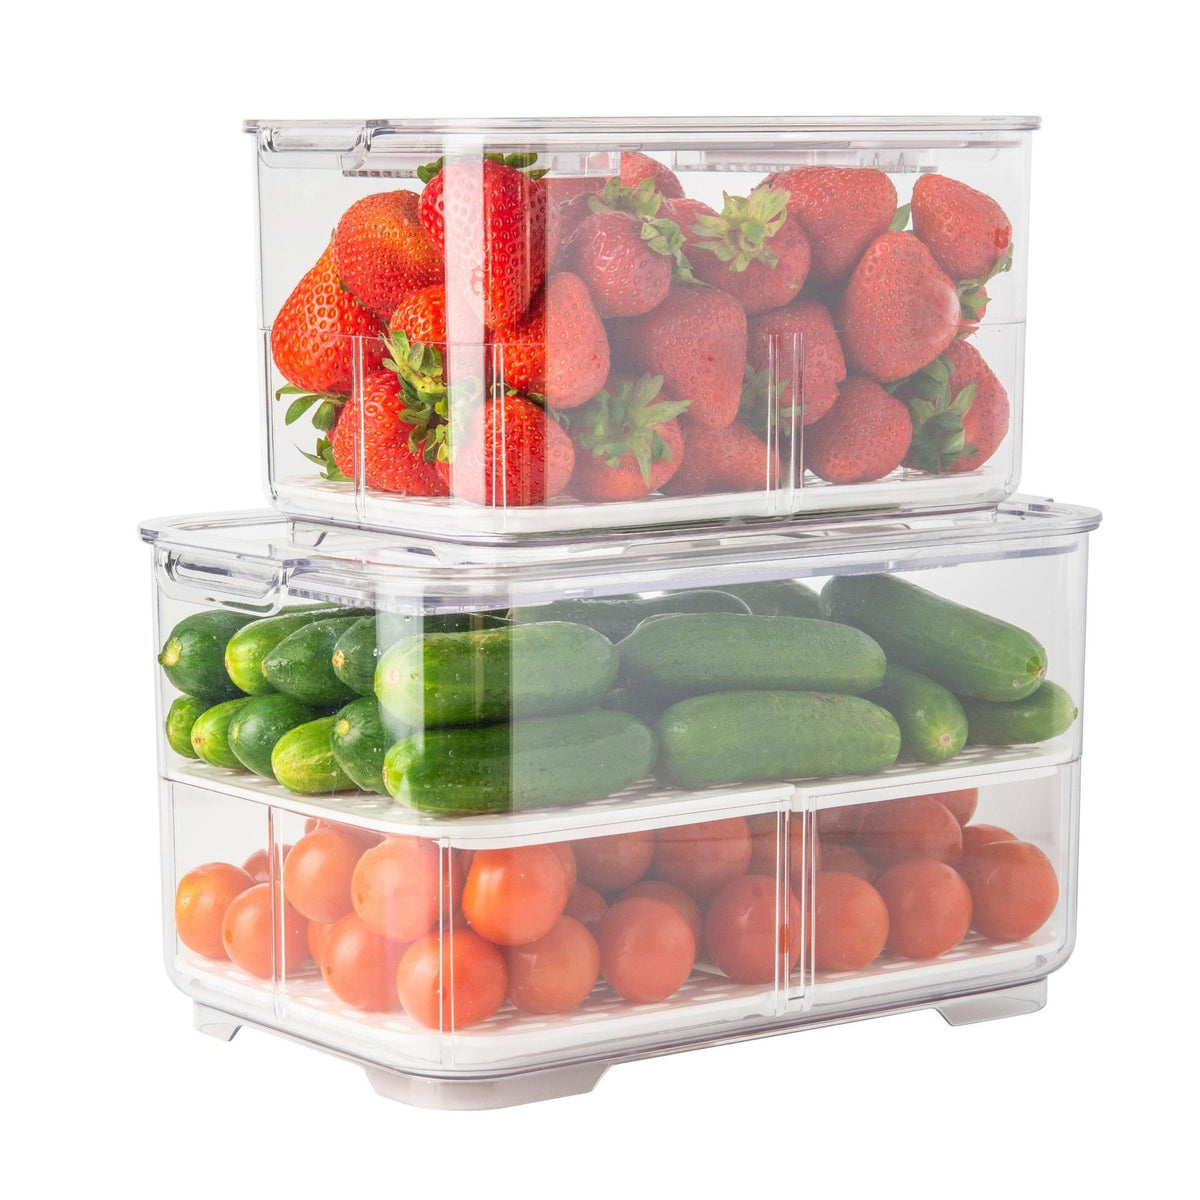 Visland Produce Saver Refrigerator Organizer Bins - Stackable Fridge  Storage Containers with Removable Drain Tray for Produce, Fruits,  Vegetables